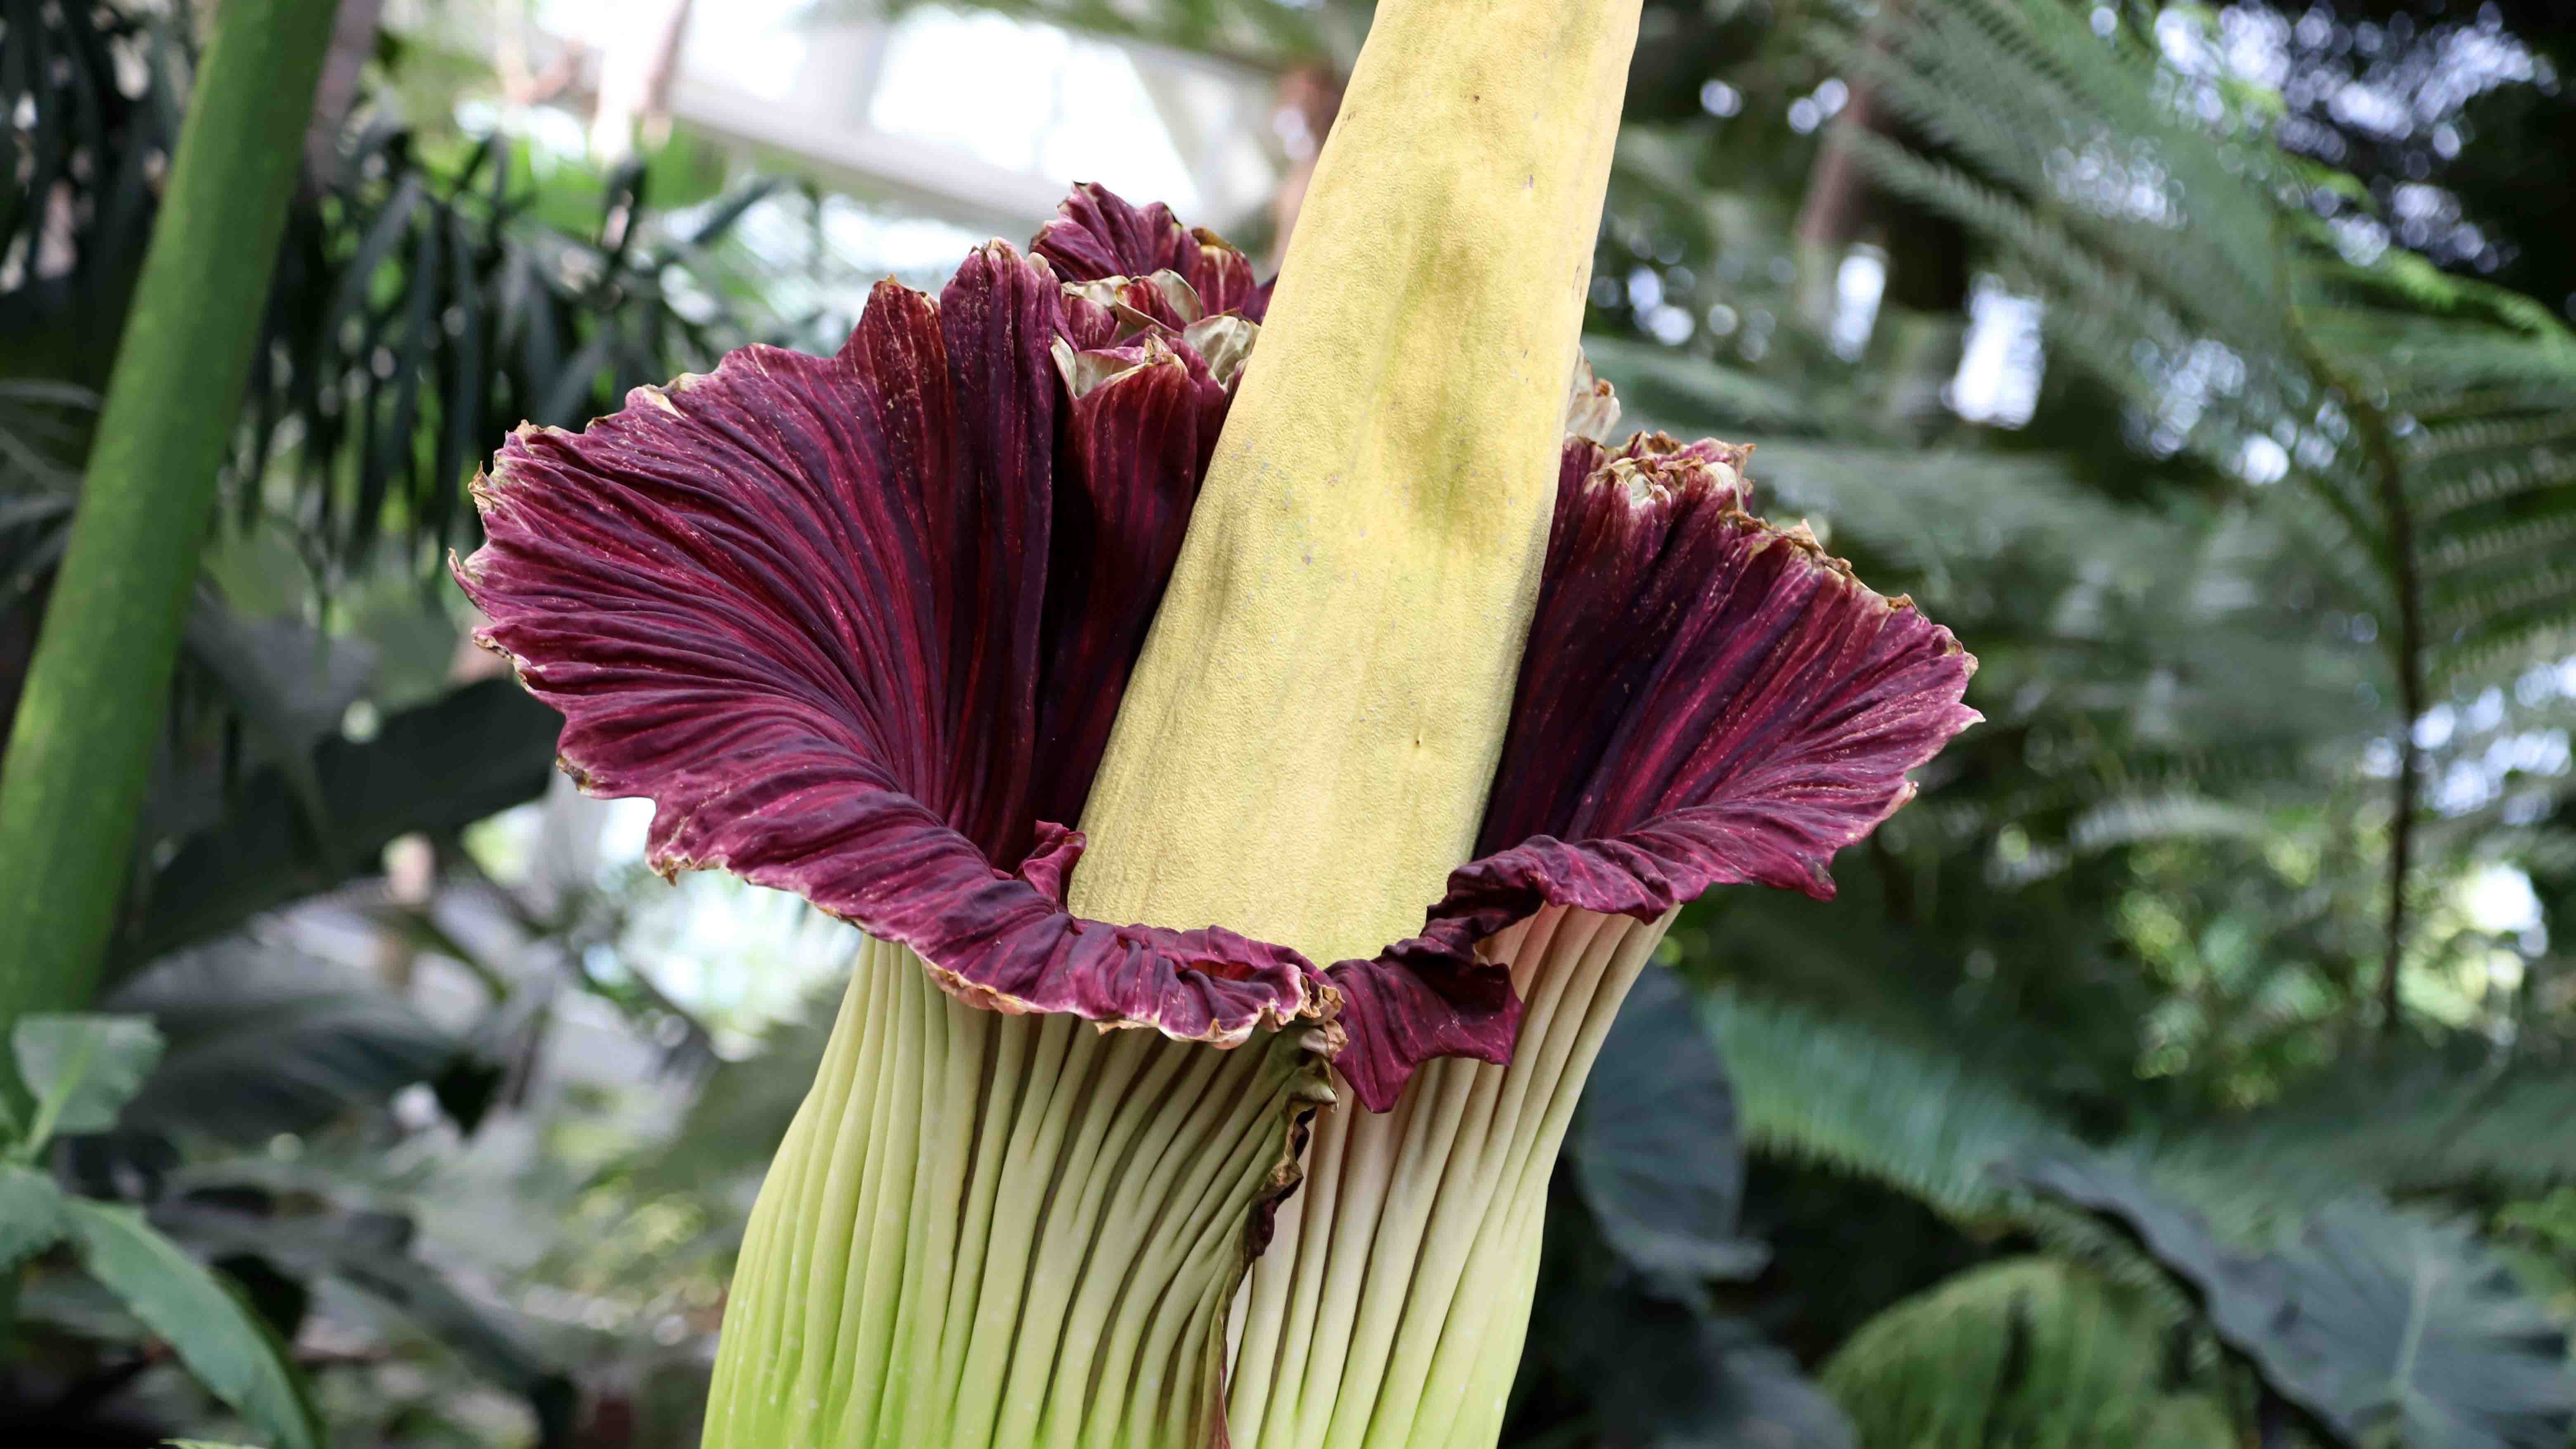 Rancid Smelling Corpse Flower Opening Up Newsline